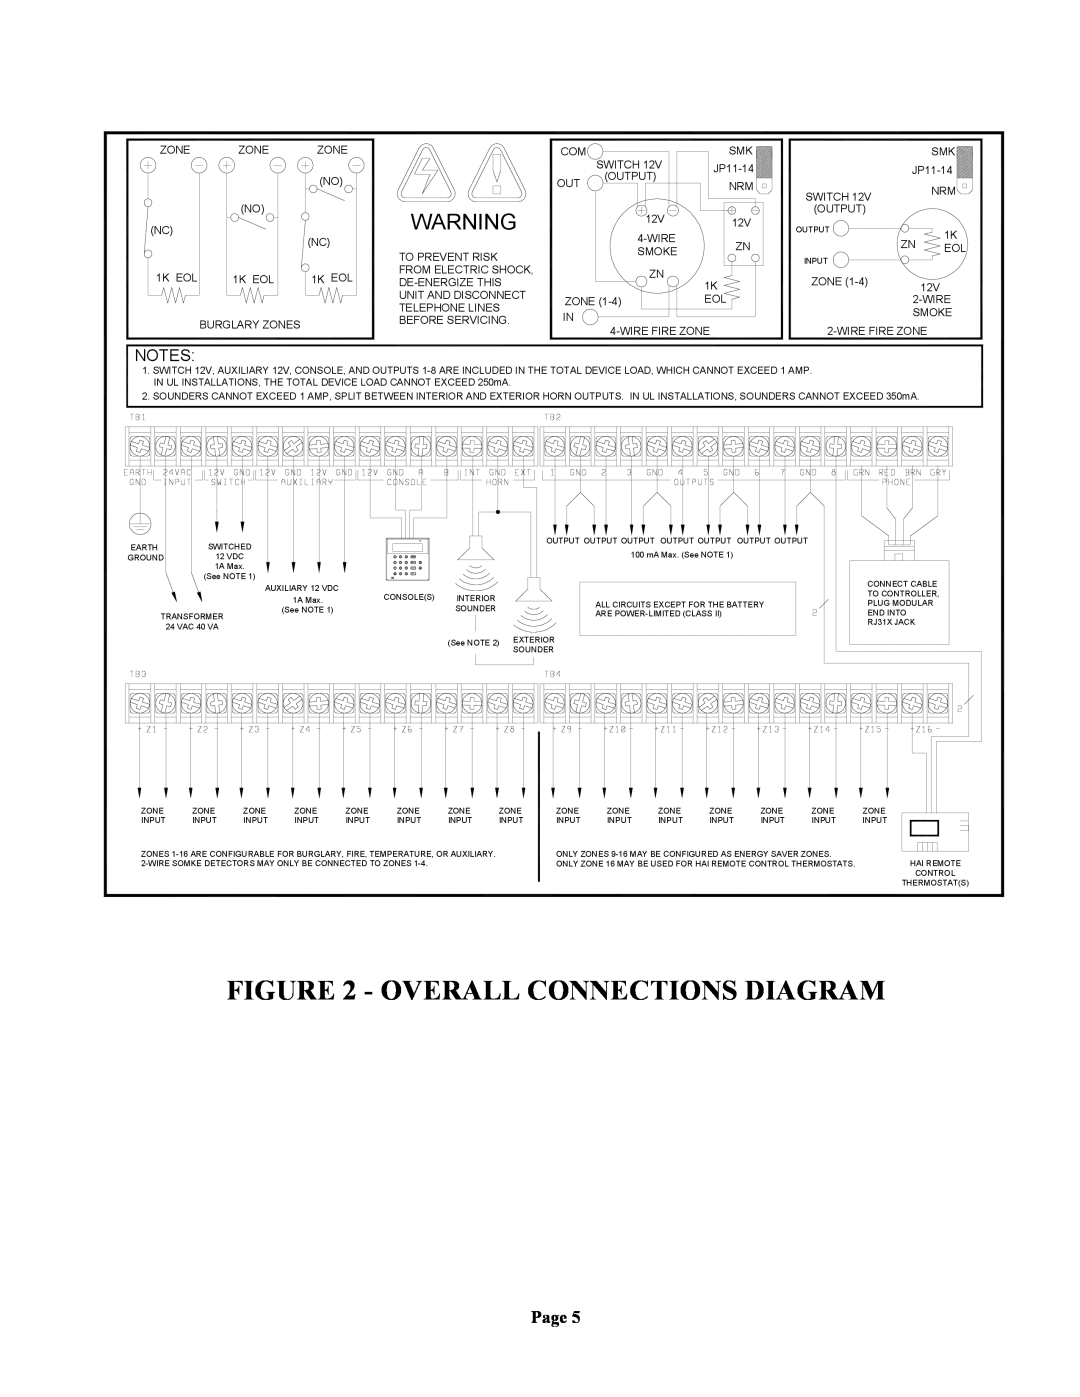 Home Automation 20A00-1 installation manual Overall Connections Diagram, Page 